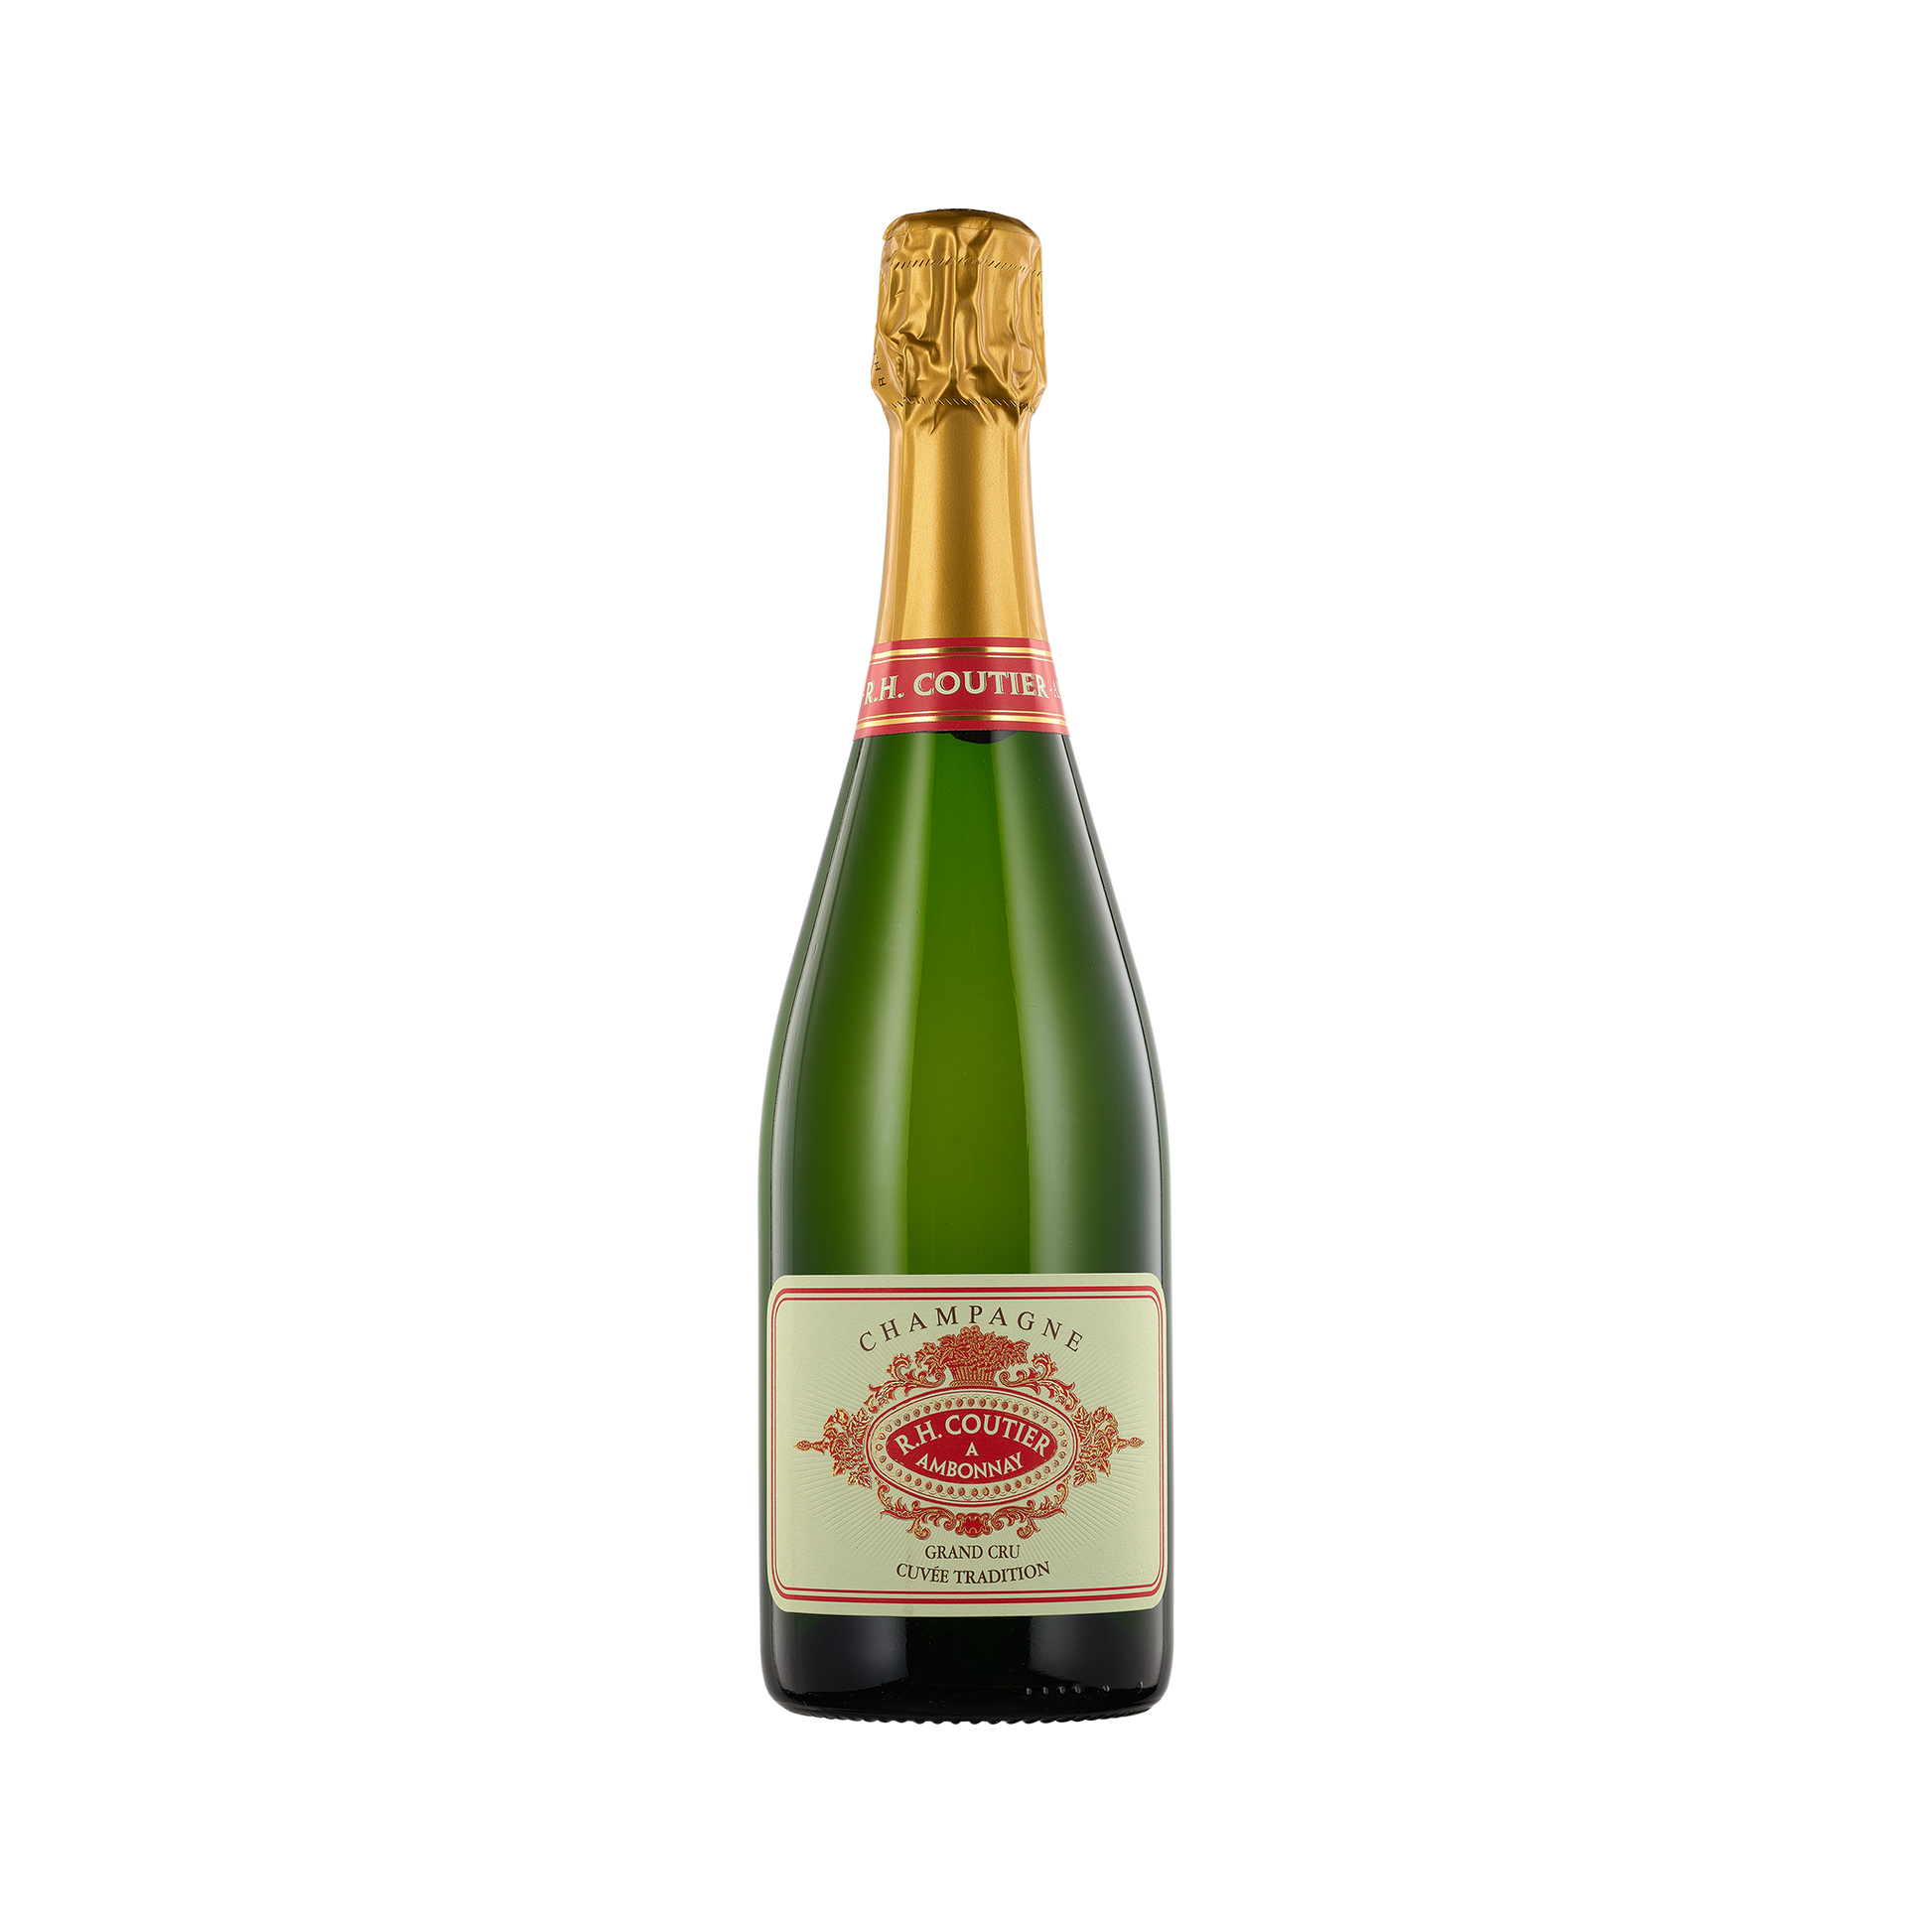 A bottle of R.H. Coutier 'Brut Tradition' Champagne